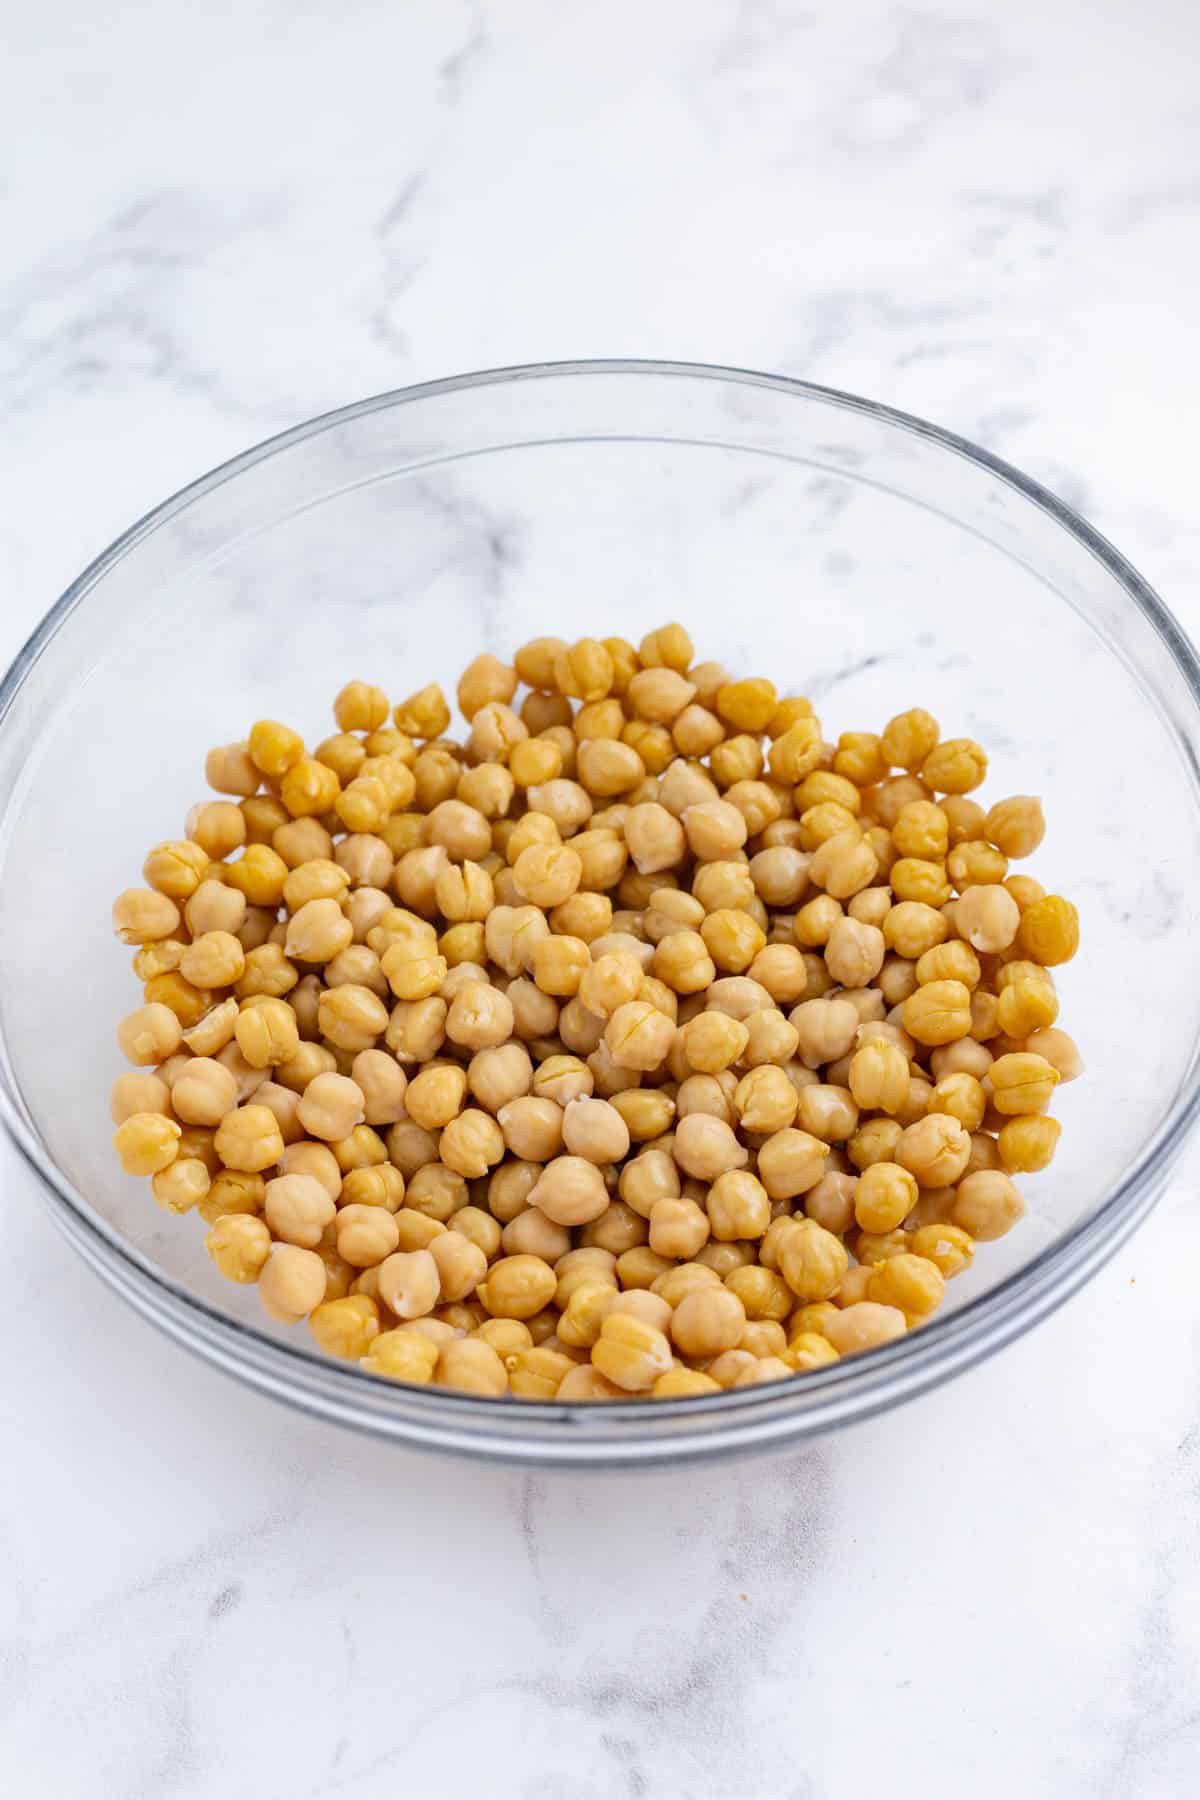 Drizzle olive oil over dried chickpeas.